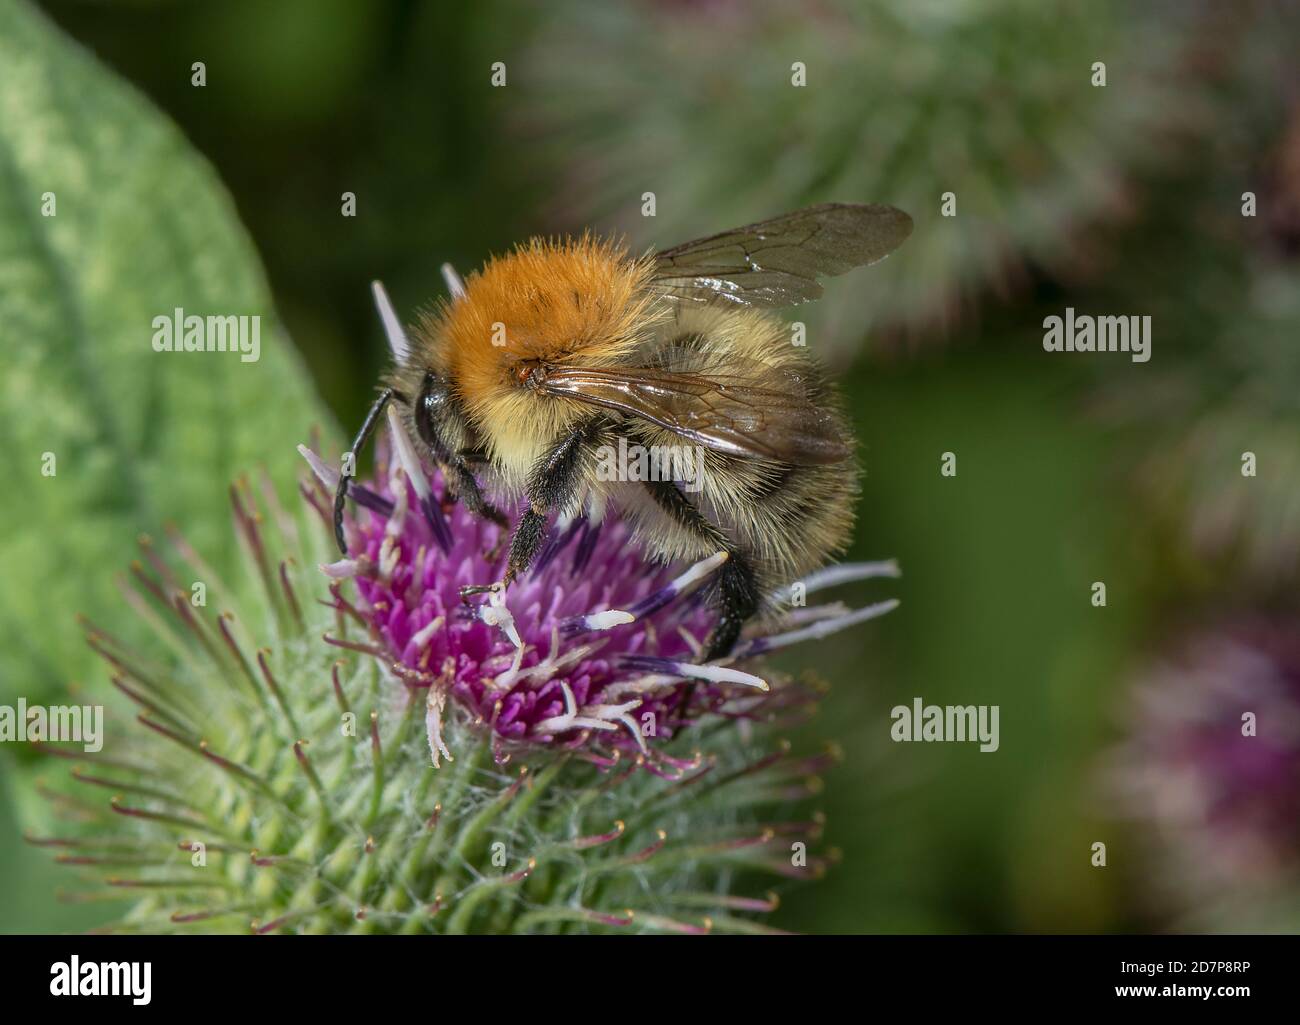 Common Carder Bee, Bombus pascuorum, visiting Burdock flower for nectar. Stock Photo